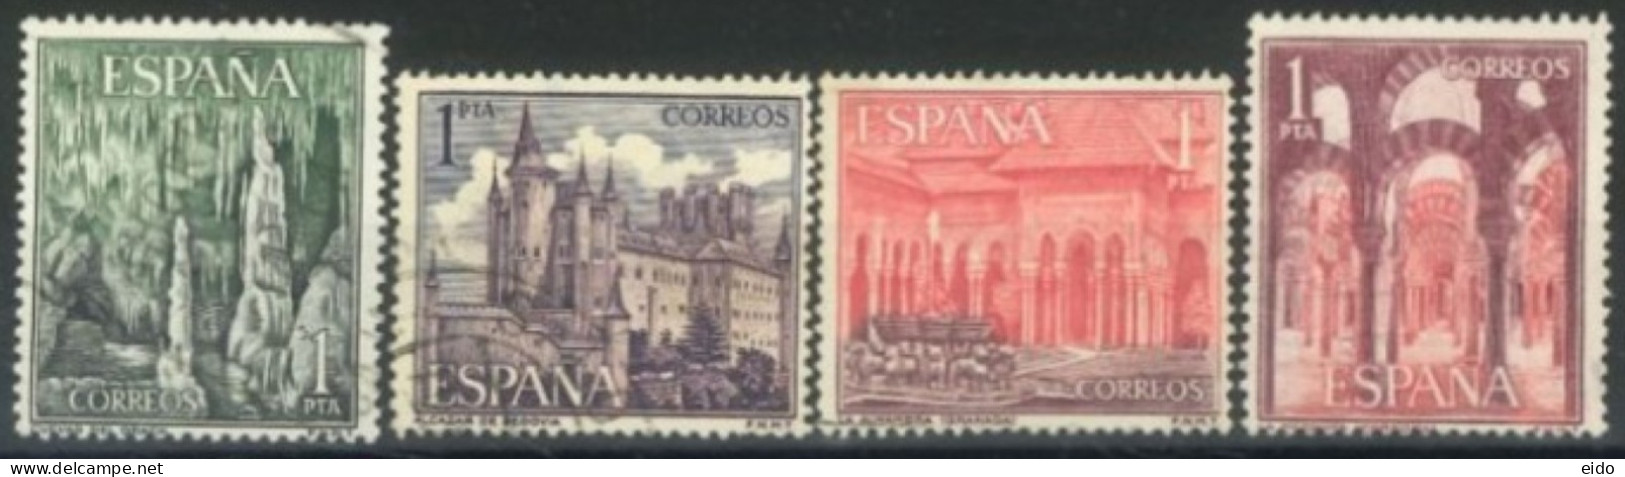 SPAIN, 1964, TORISM STAMPS SET OF 4, # 1205/08, USED. - Used Stamps